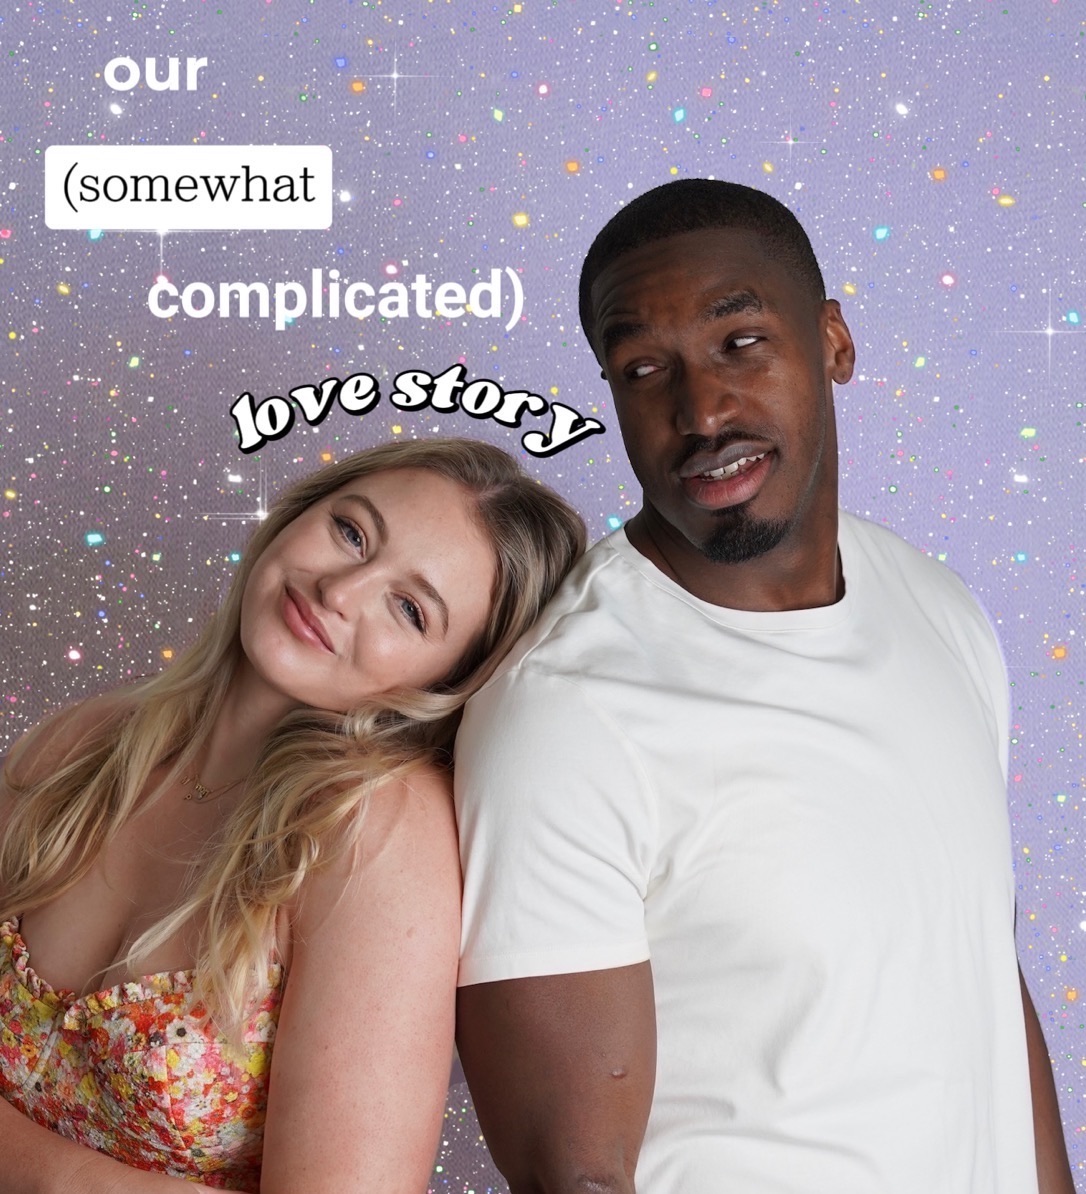 Iskra leaning on Philip, and he's looking at her. The text over their heads says "our (somewhat complicated) love story".